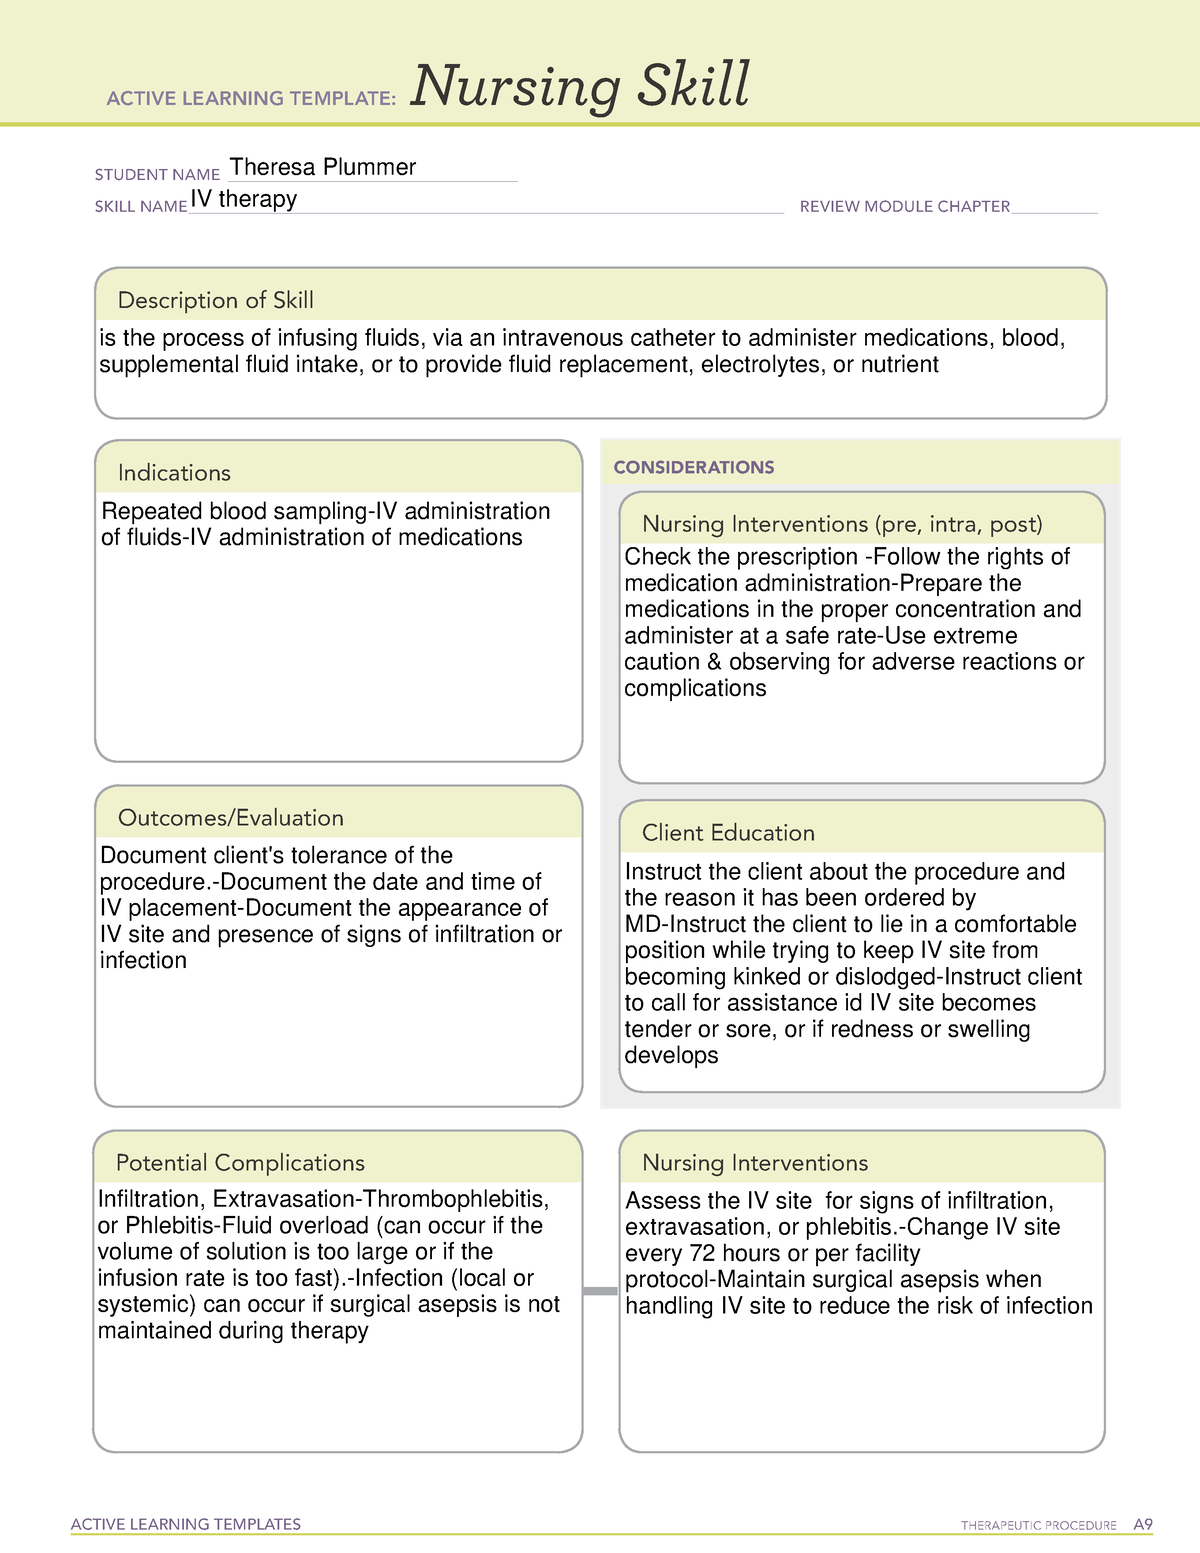 Nursing Skill Form Active Learning Templates Therapeutic Procedure A 